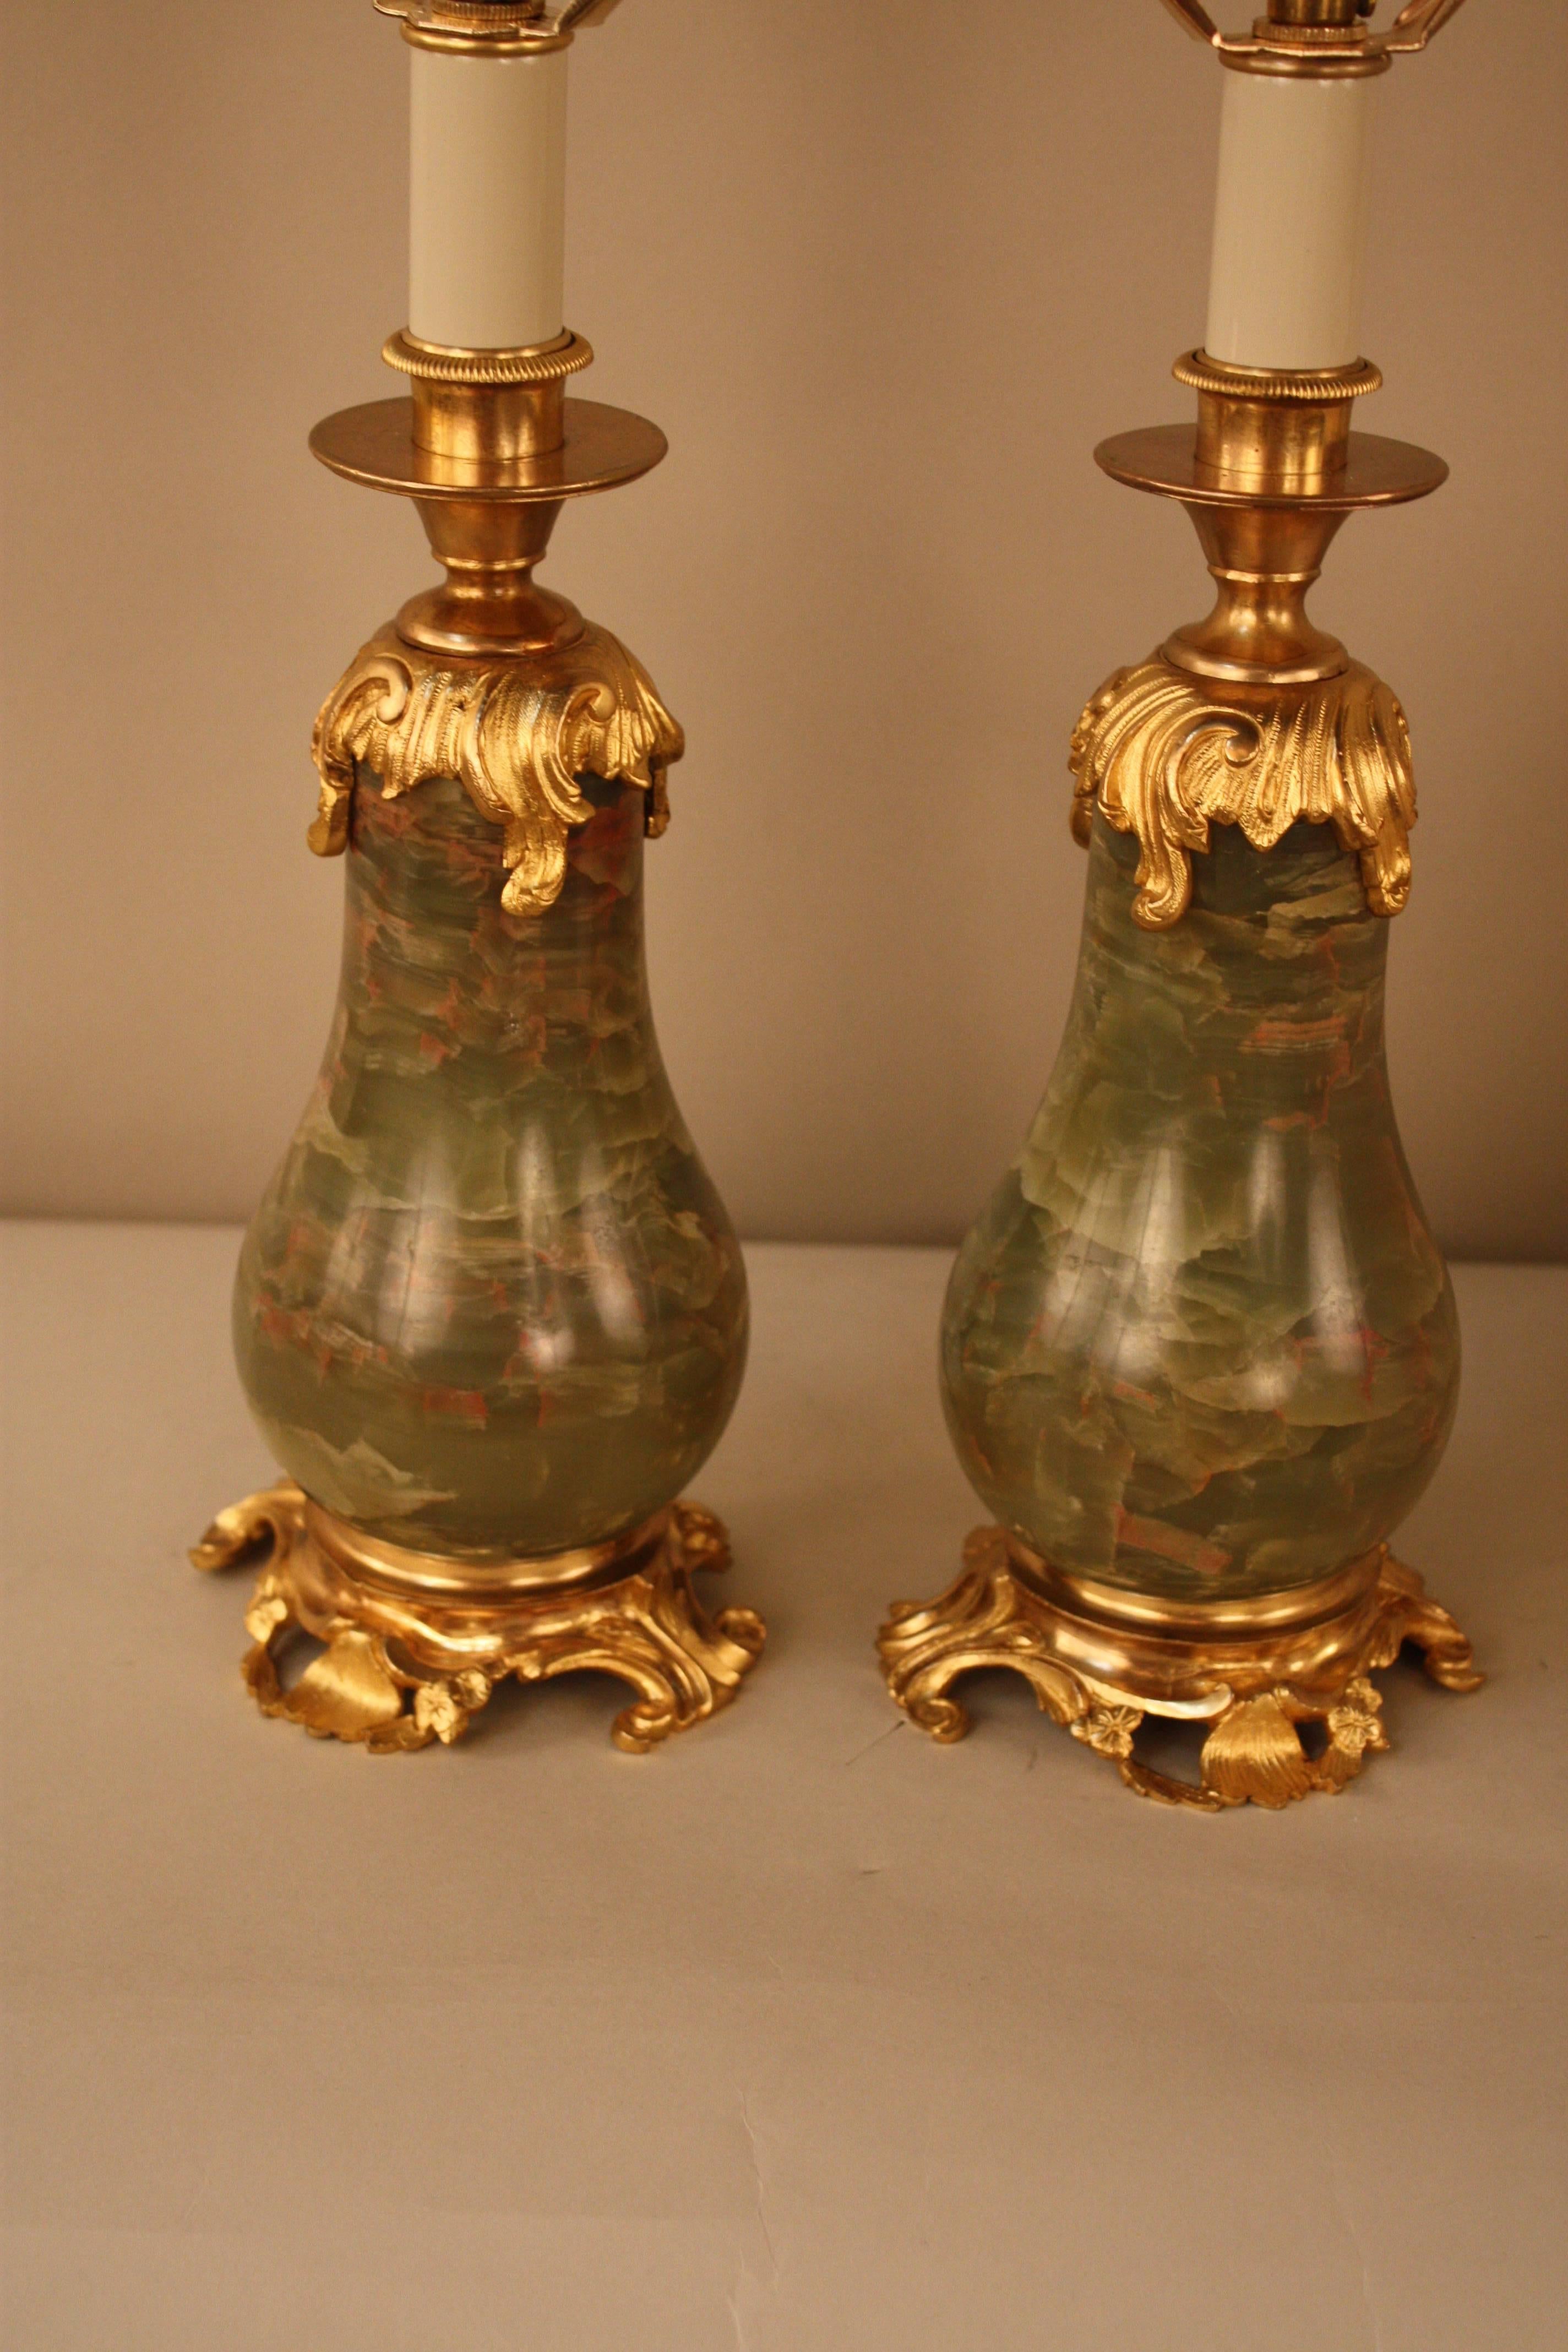 A fabulous pair of neoclassic design green onyx and doré bronze custom-made table lamps.
These beautiful lamps are fitted with hand made silk lampshades.